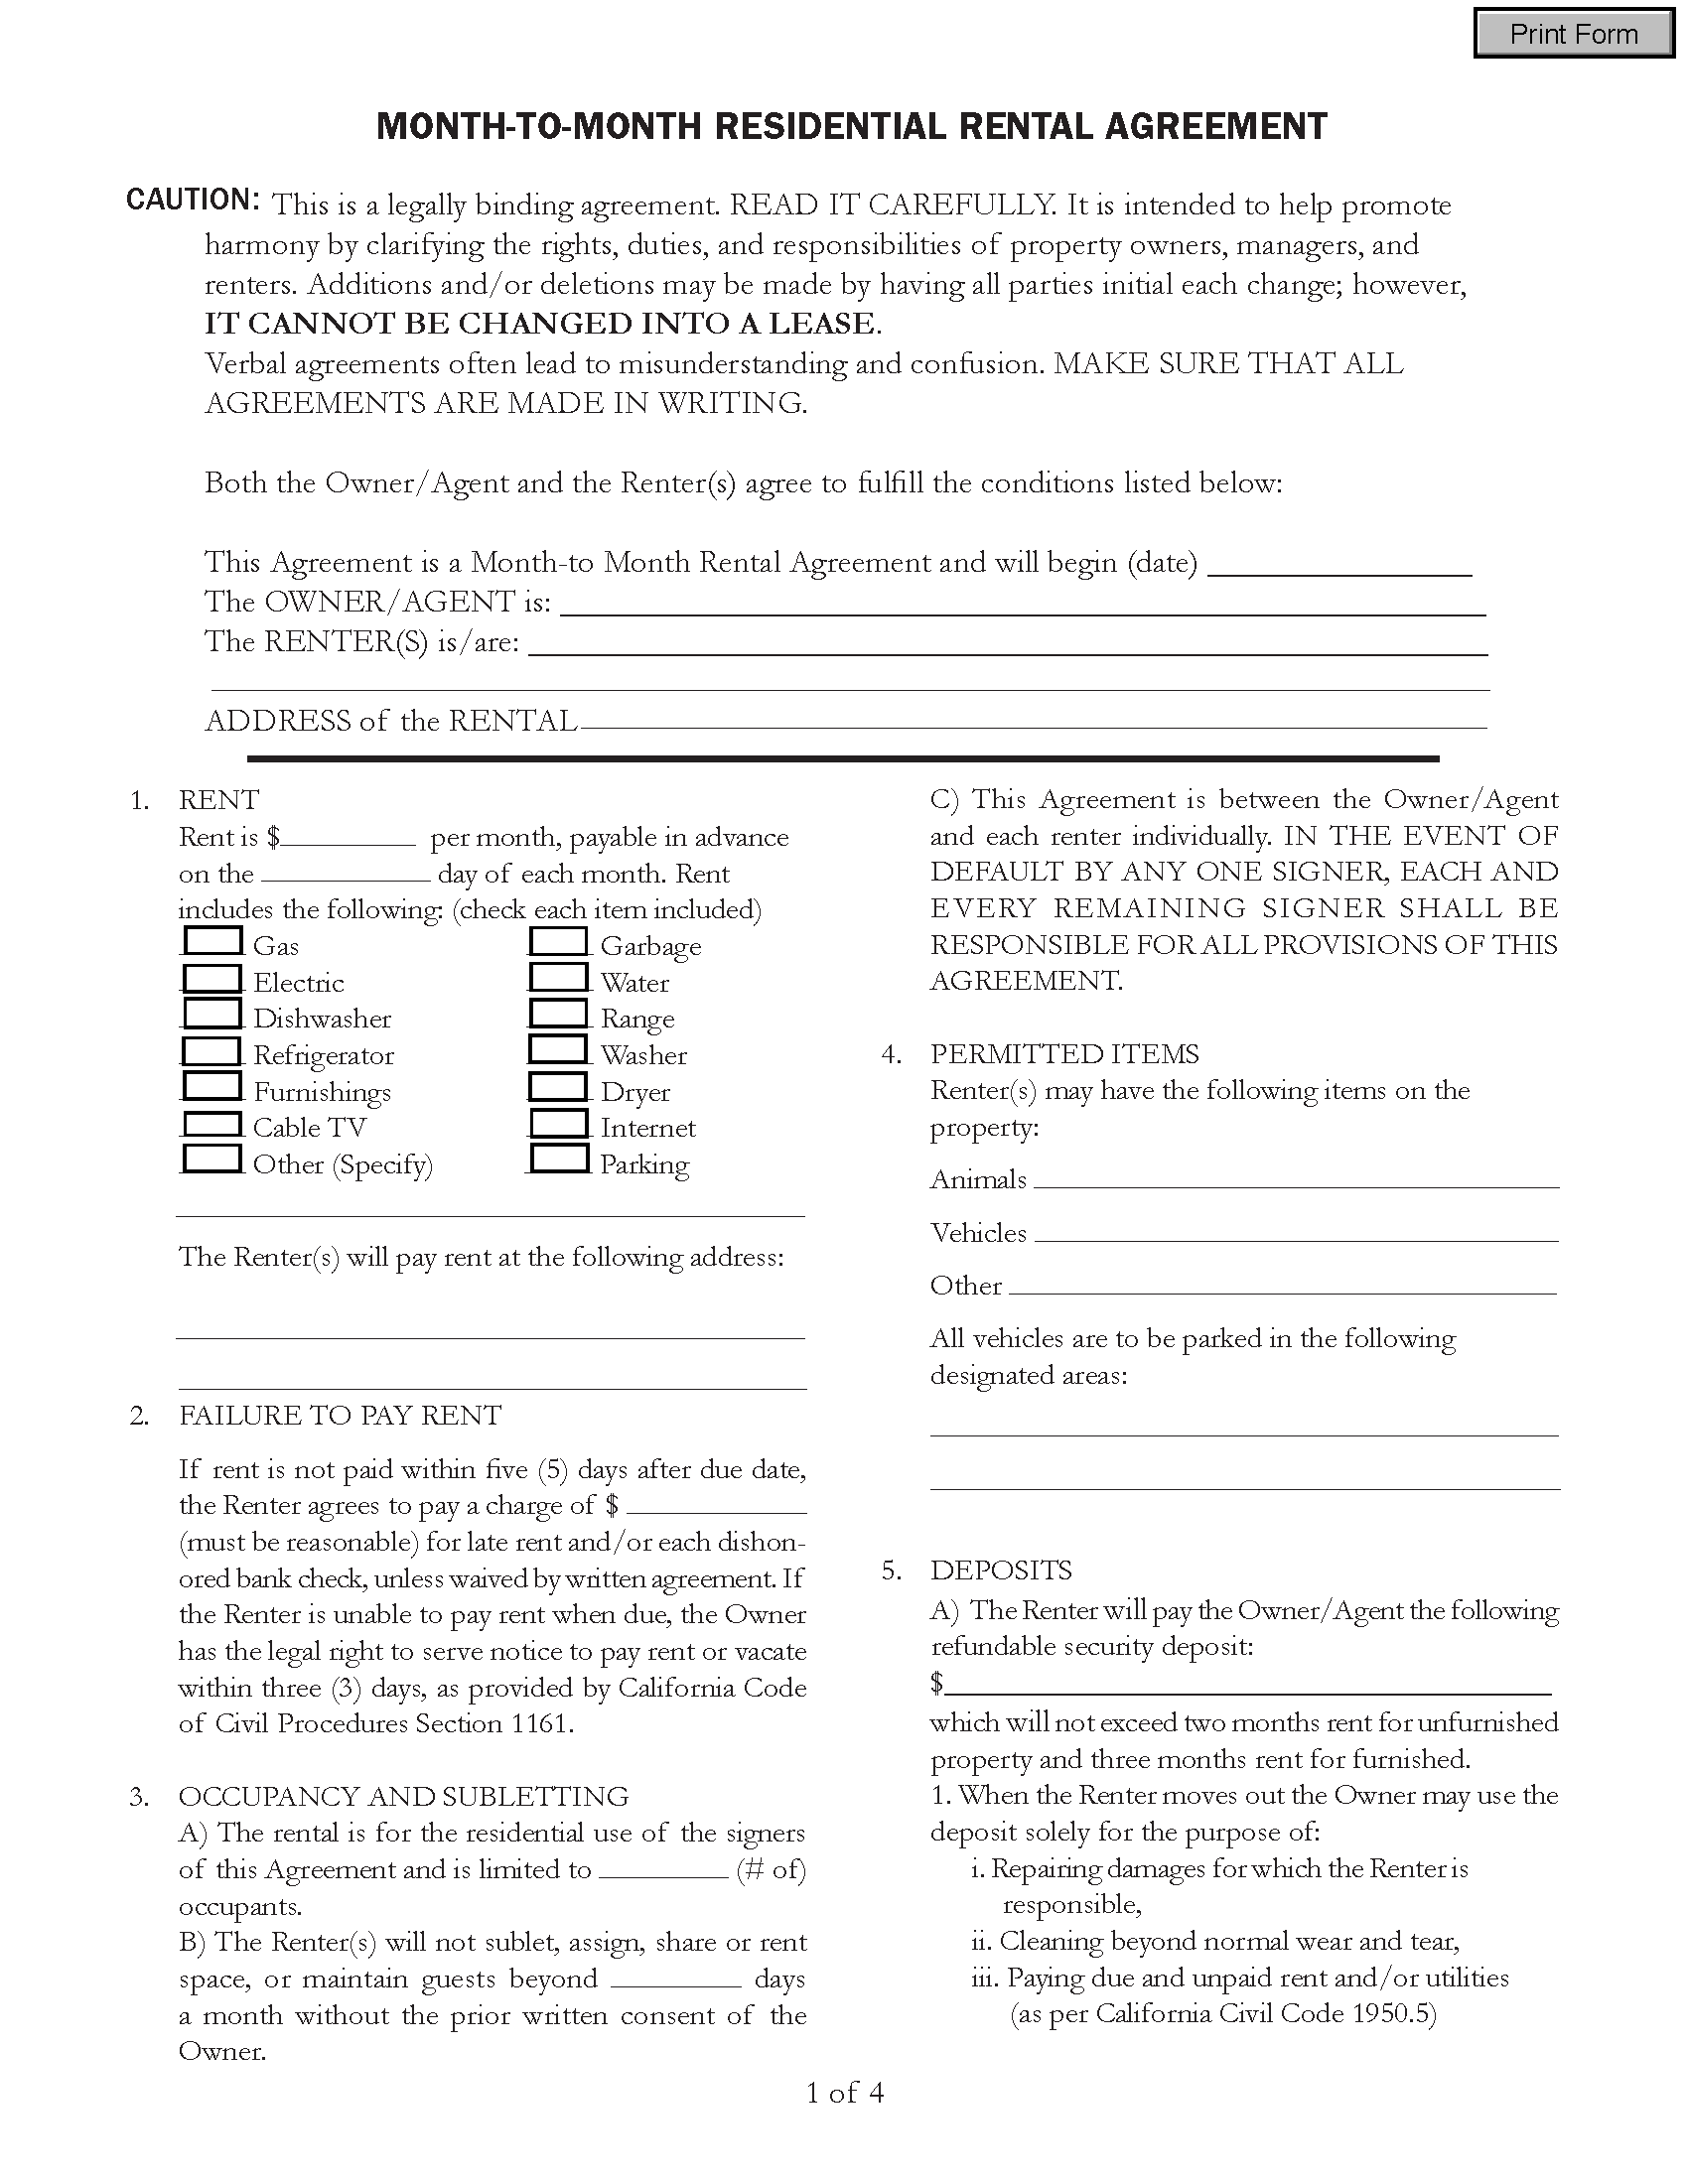 Simple Property Management Agreement Template from rentalleaseagreements.com